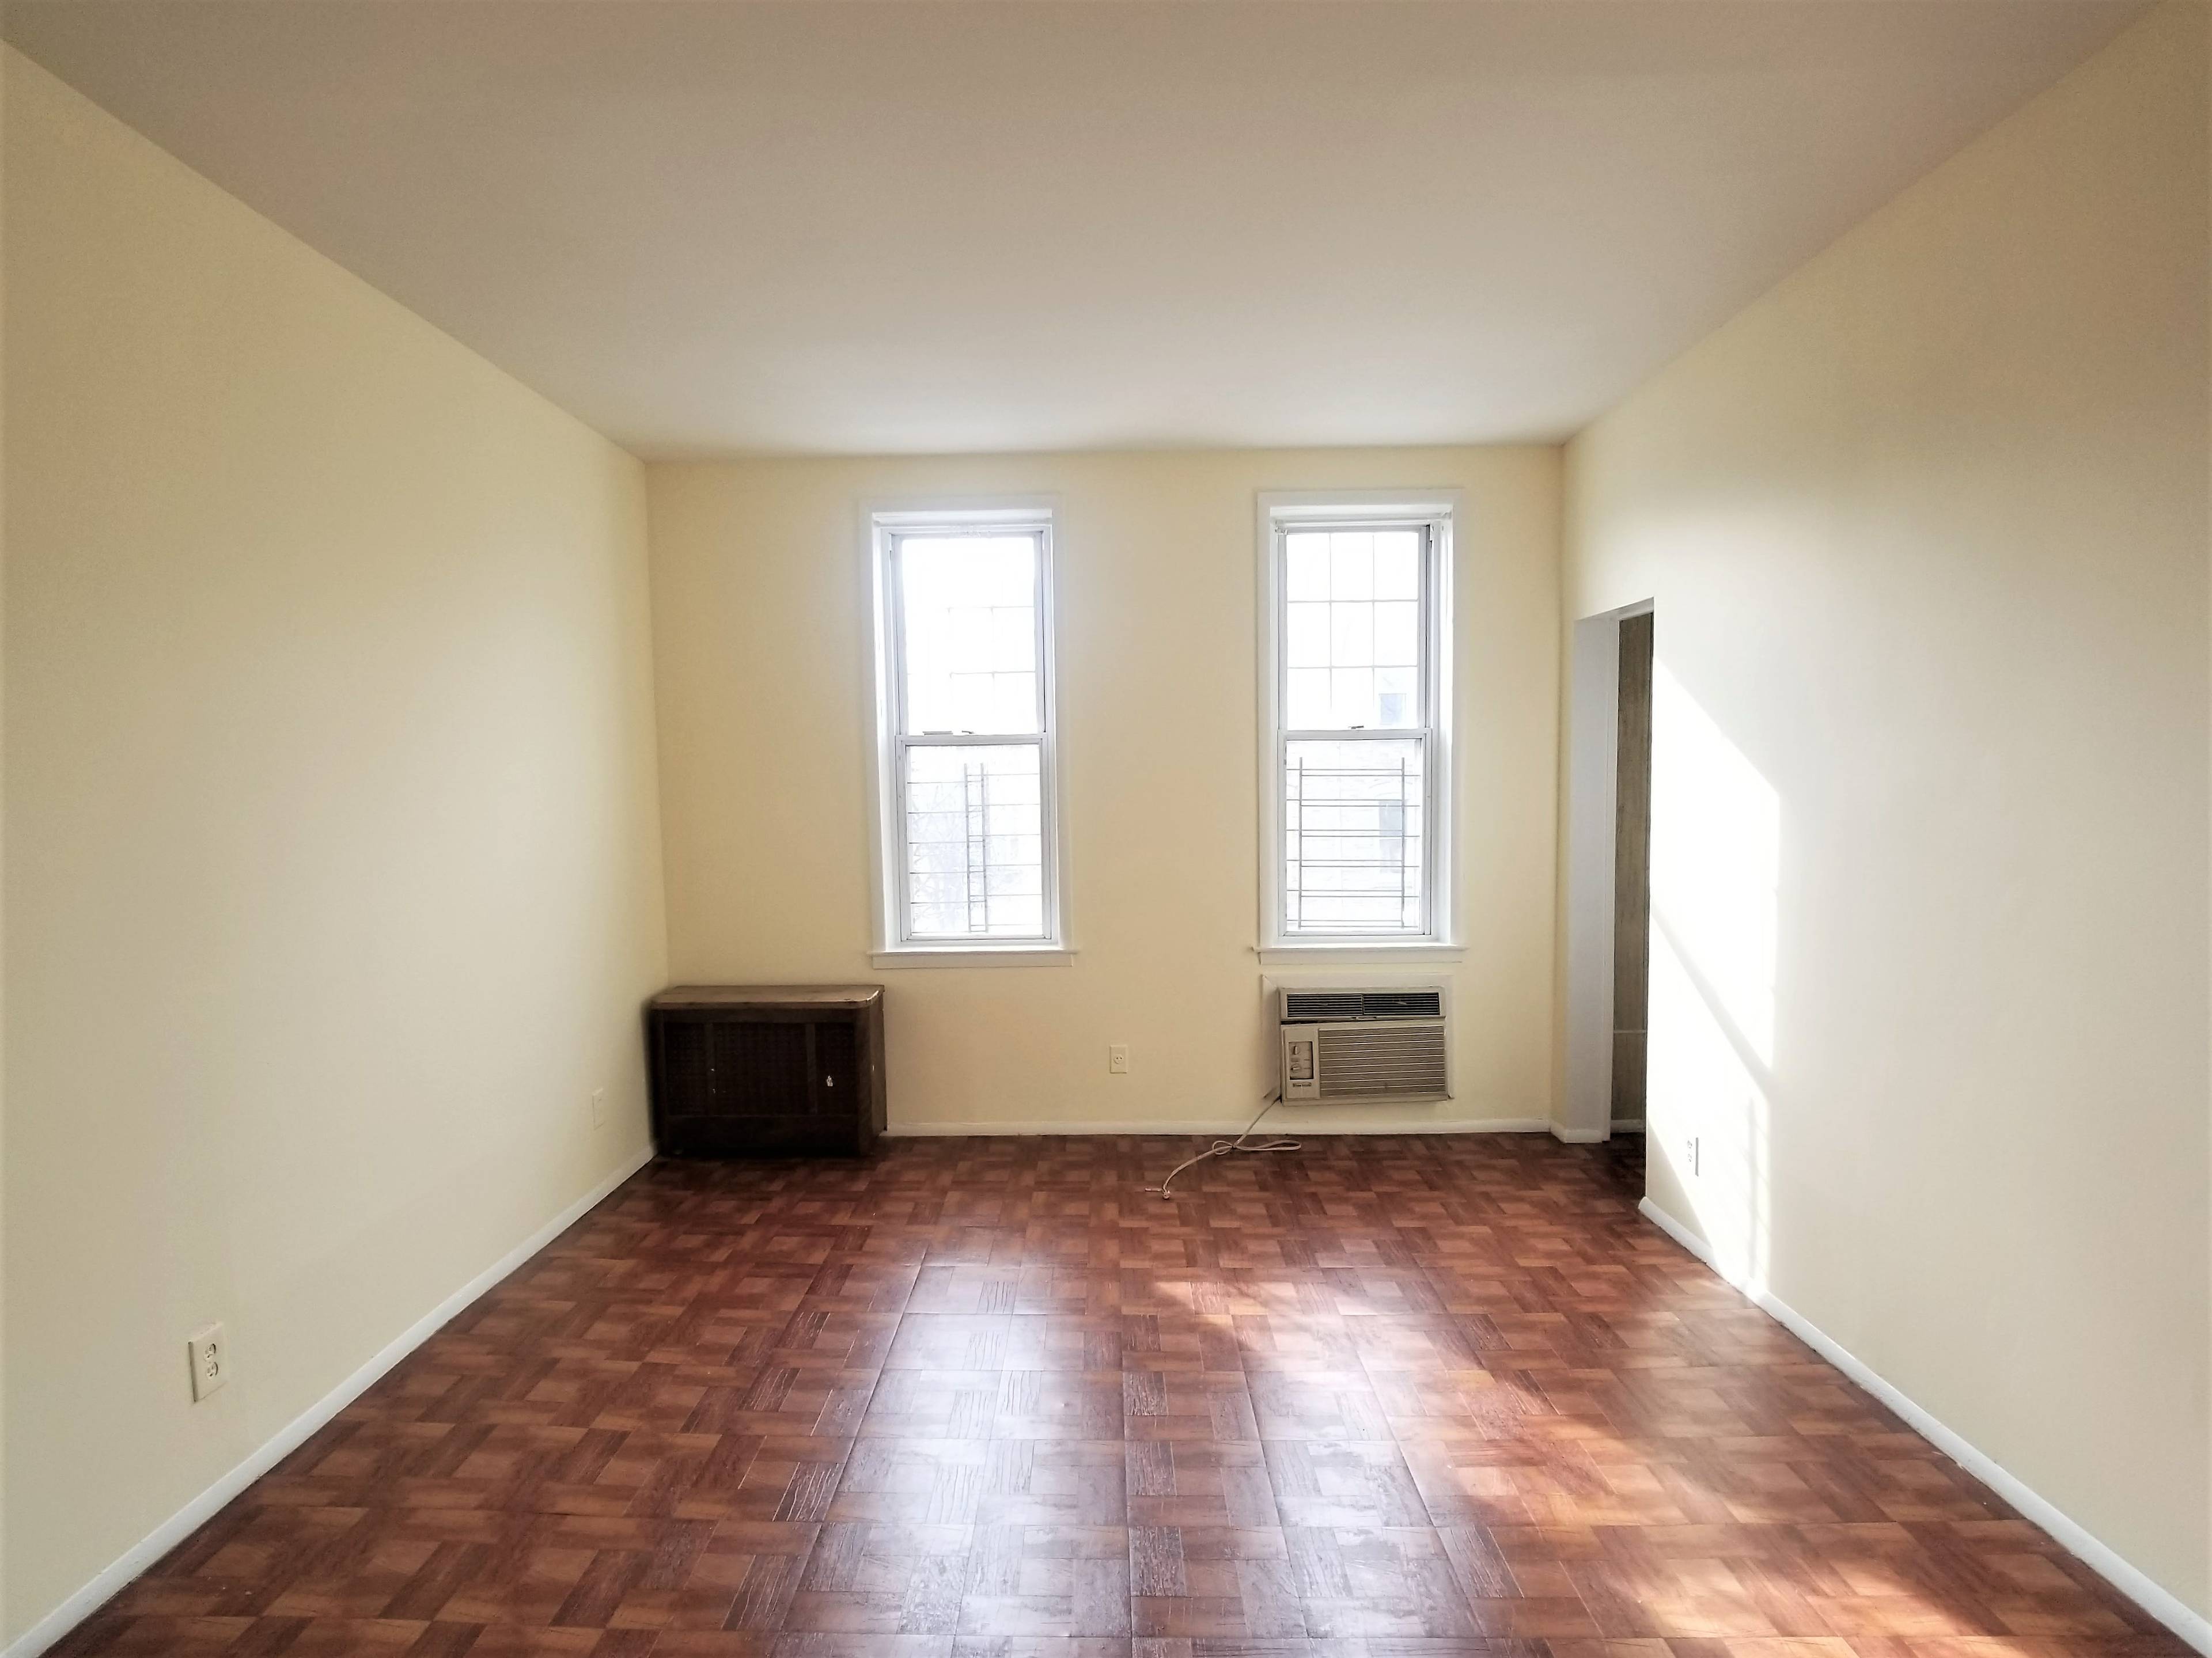 Size Matters!  Spread out and live luxuriously in this enormous, full floor apartment.